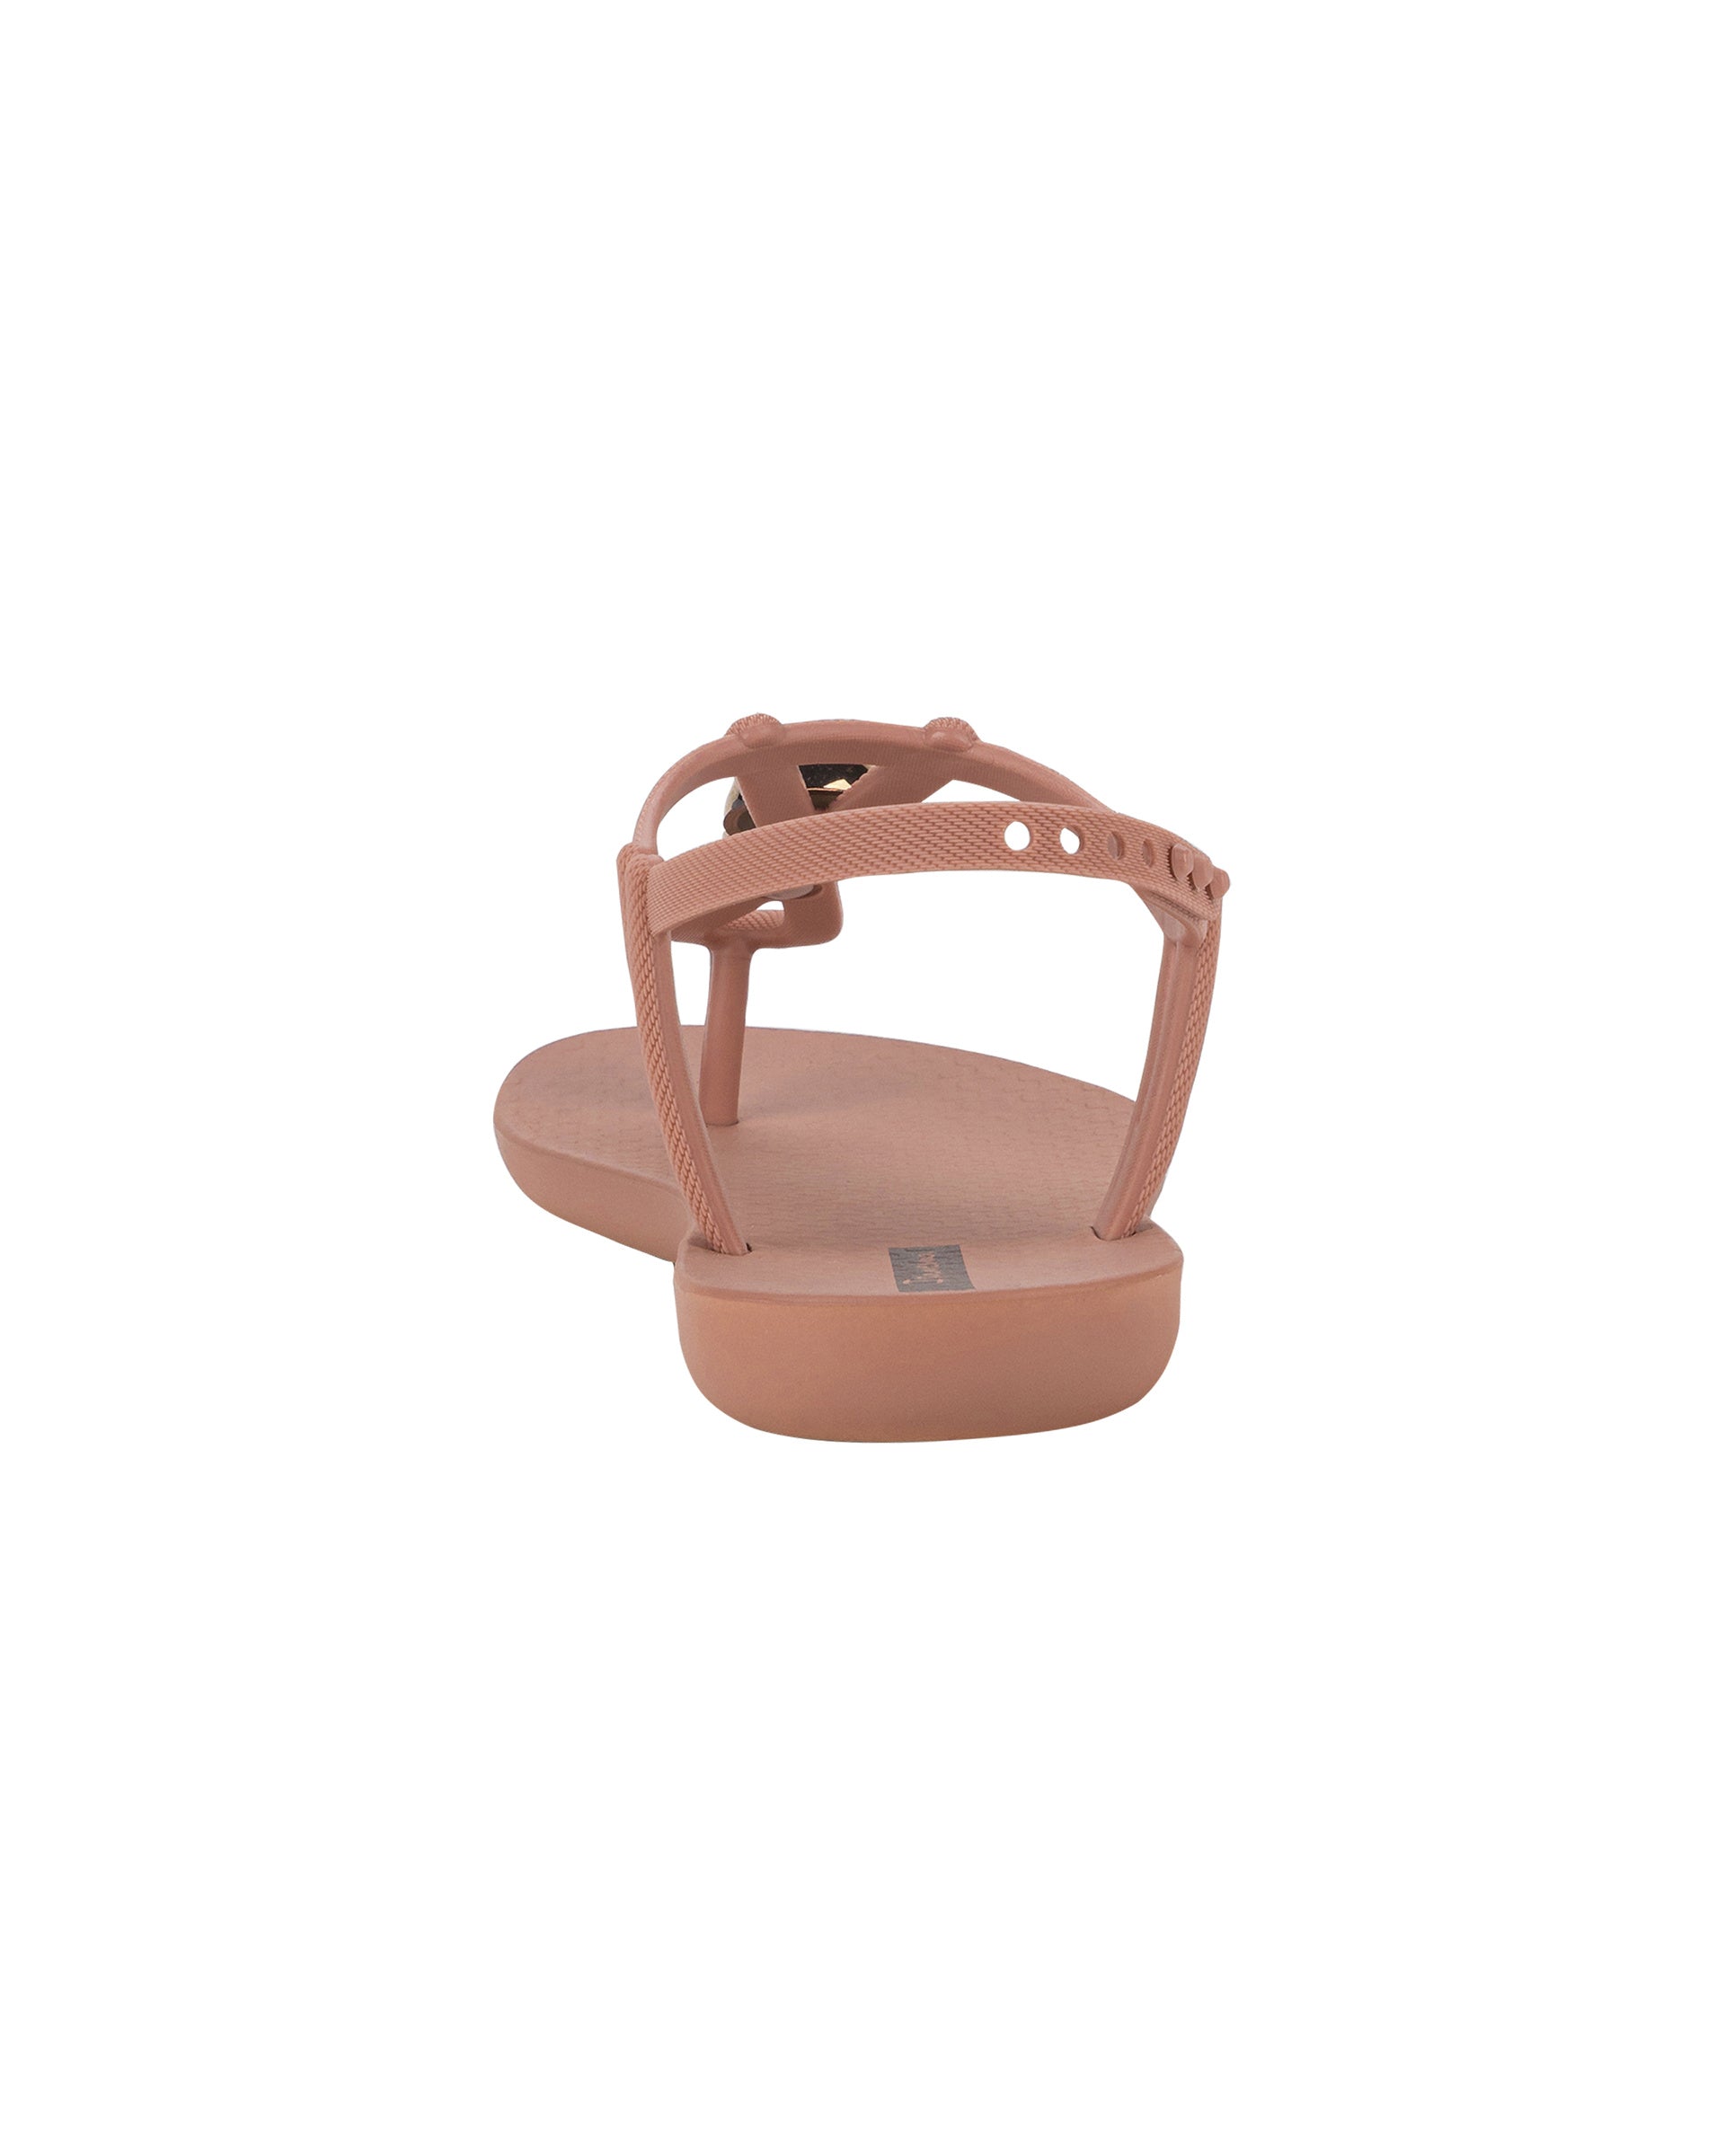 Back view of a light pink Ipanema Class Spheres women's t-strap sandal with metallic bauble.